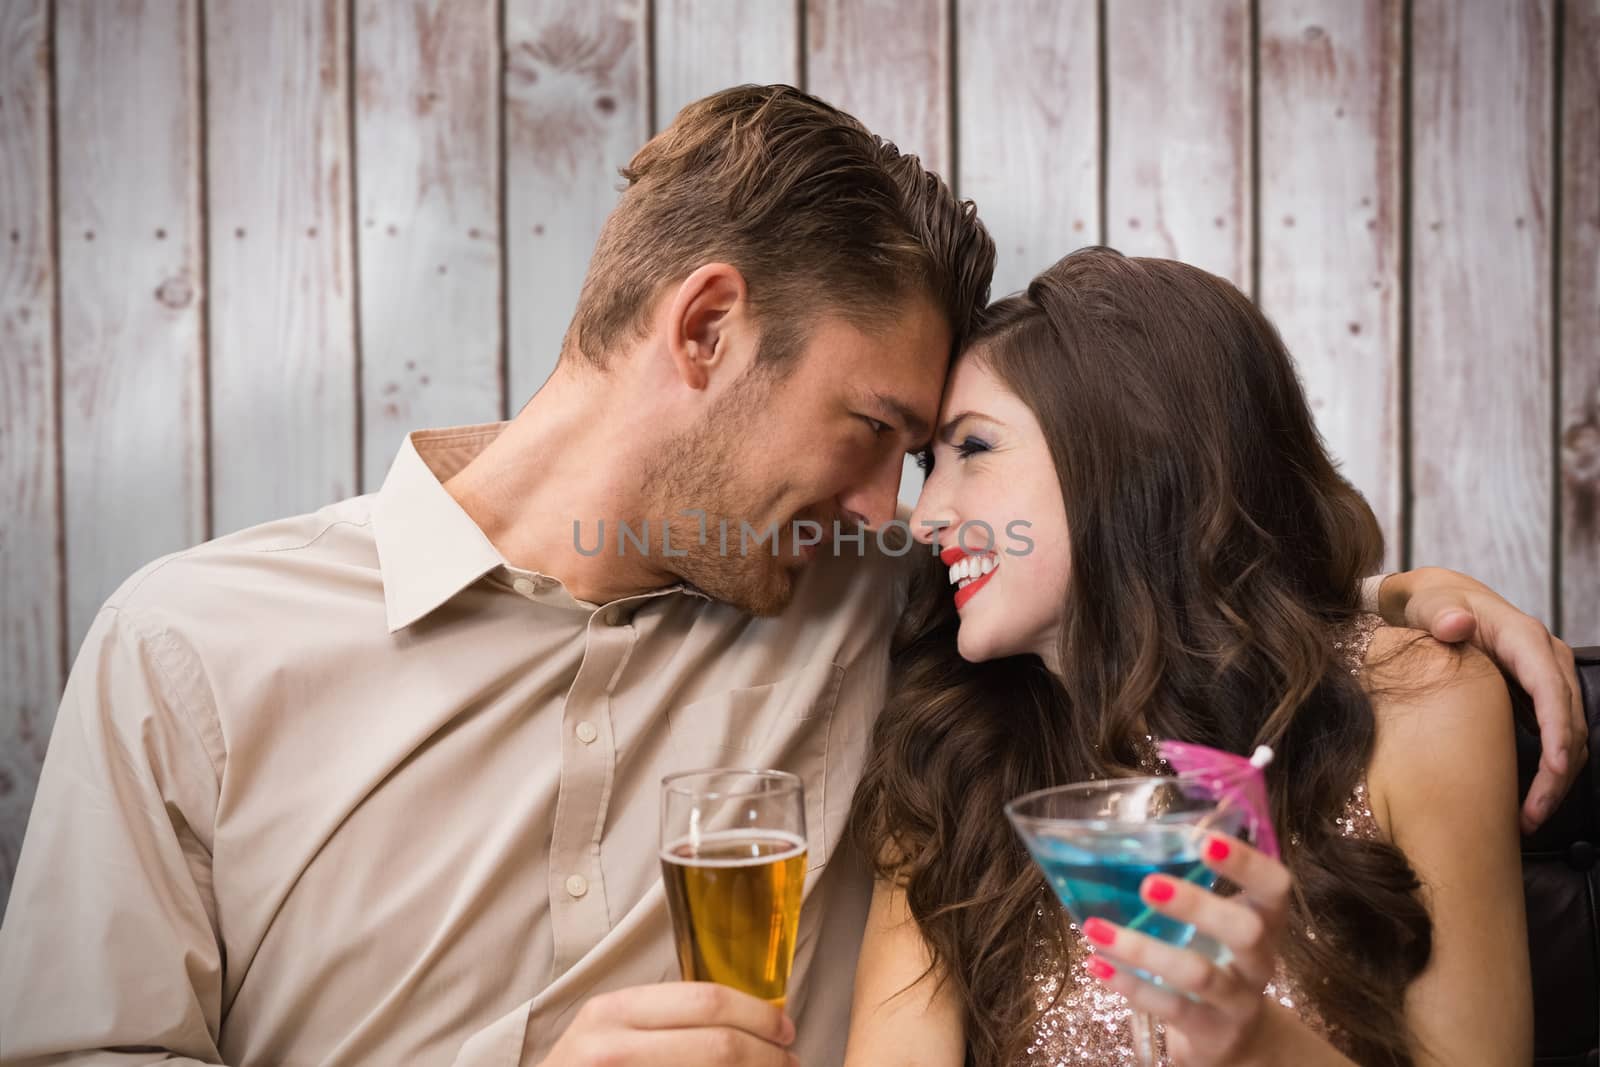 Cute couple drinking against wooden planks